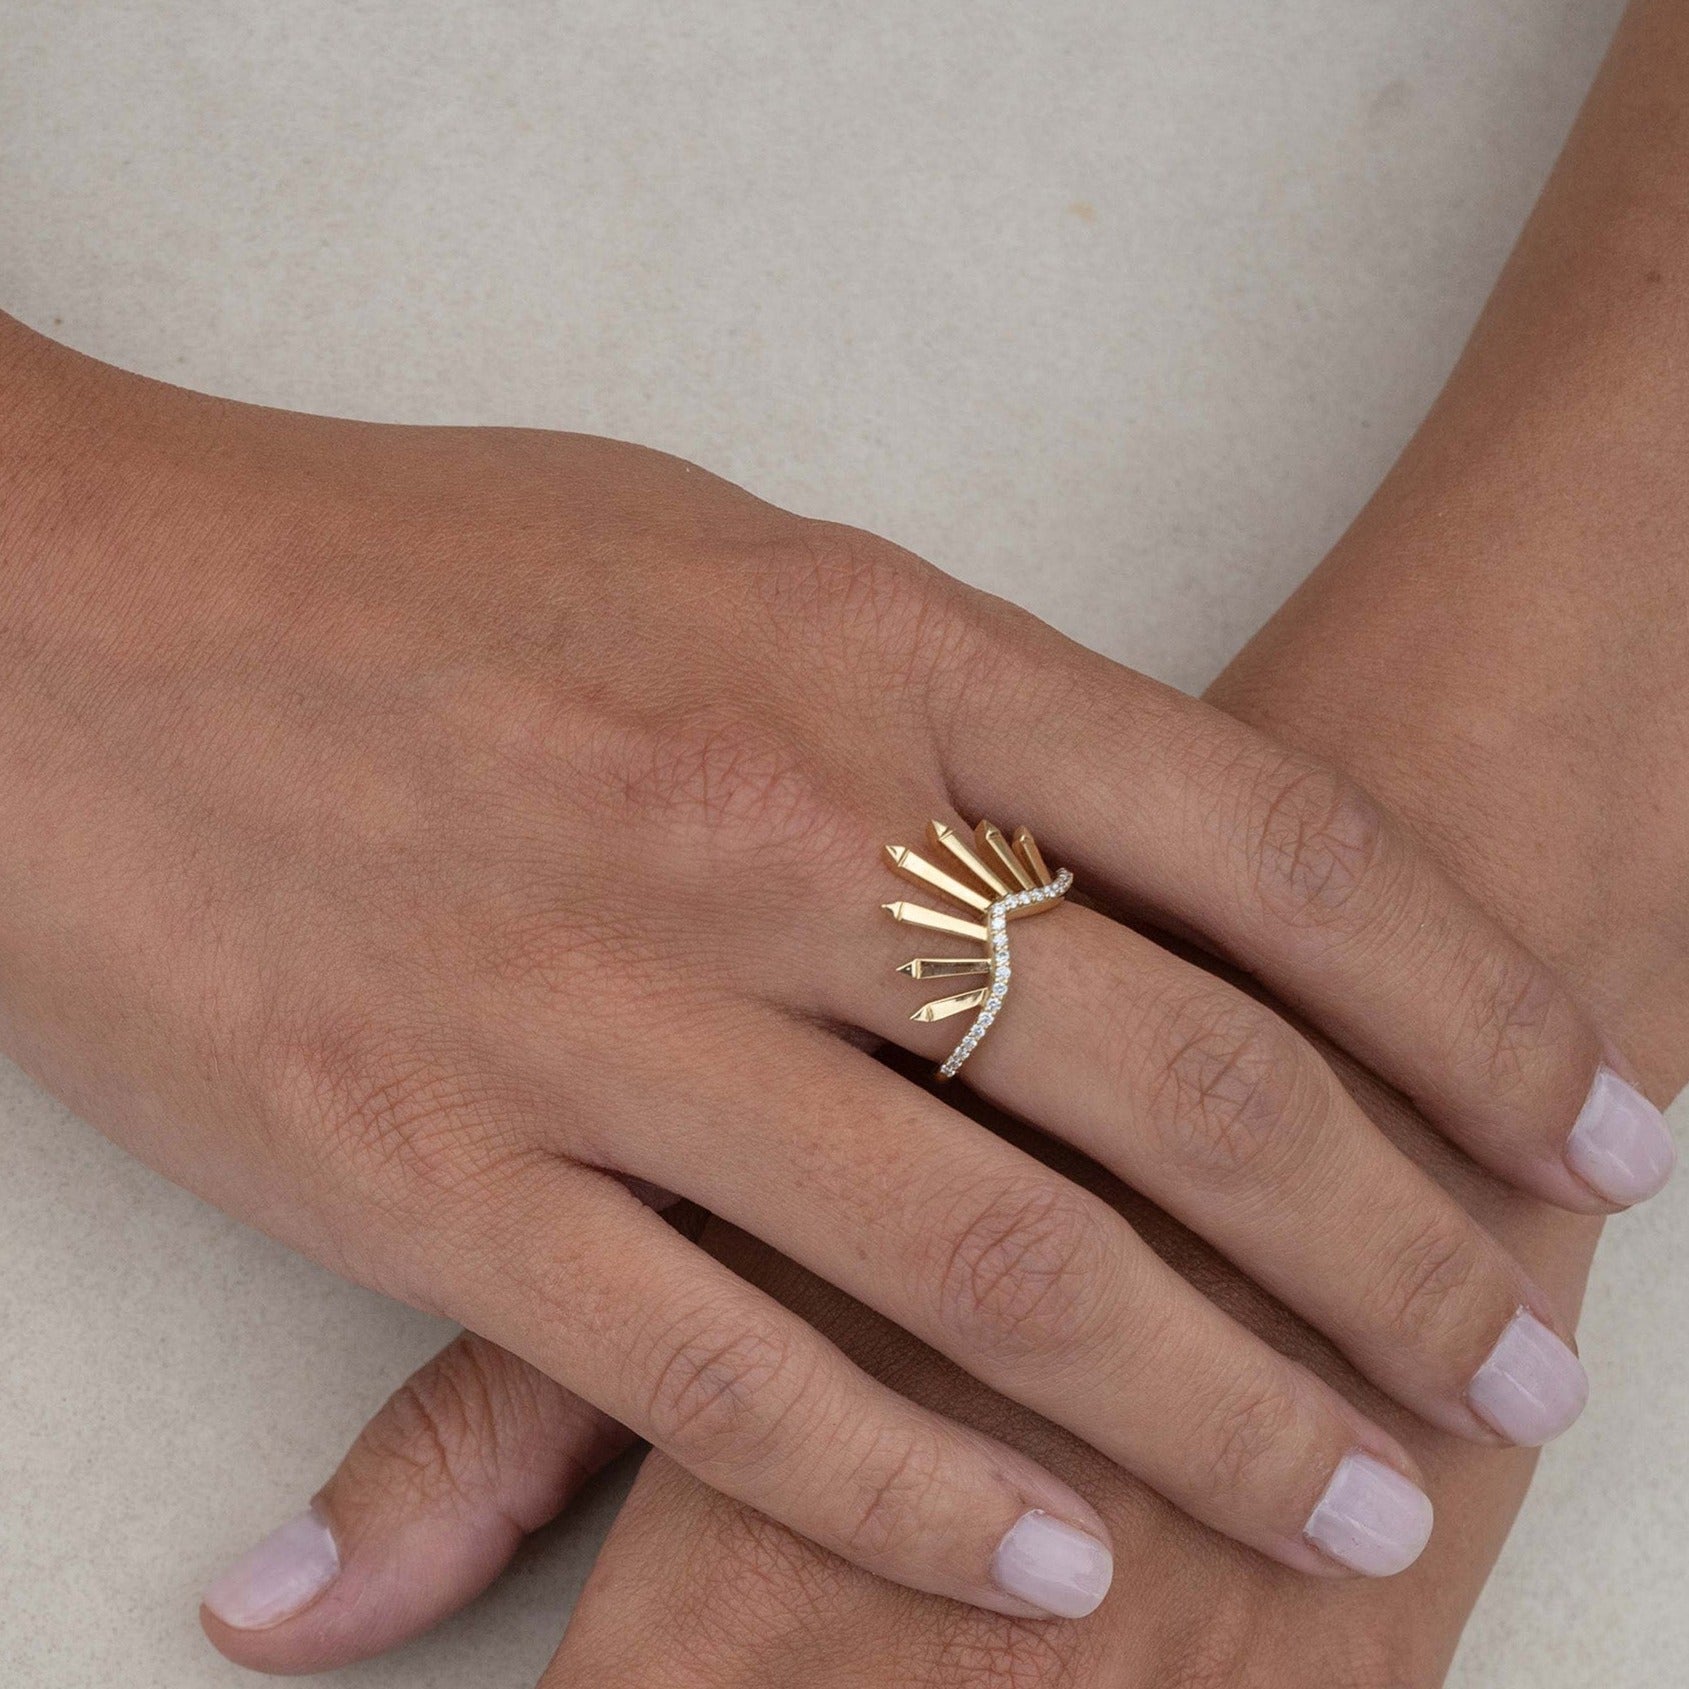 Yellow Gold Ring: Featuring radiant sunburst motifs adorned with diamonds, showcased on hand model.